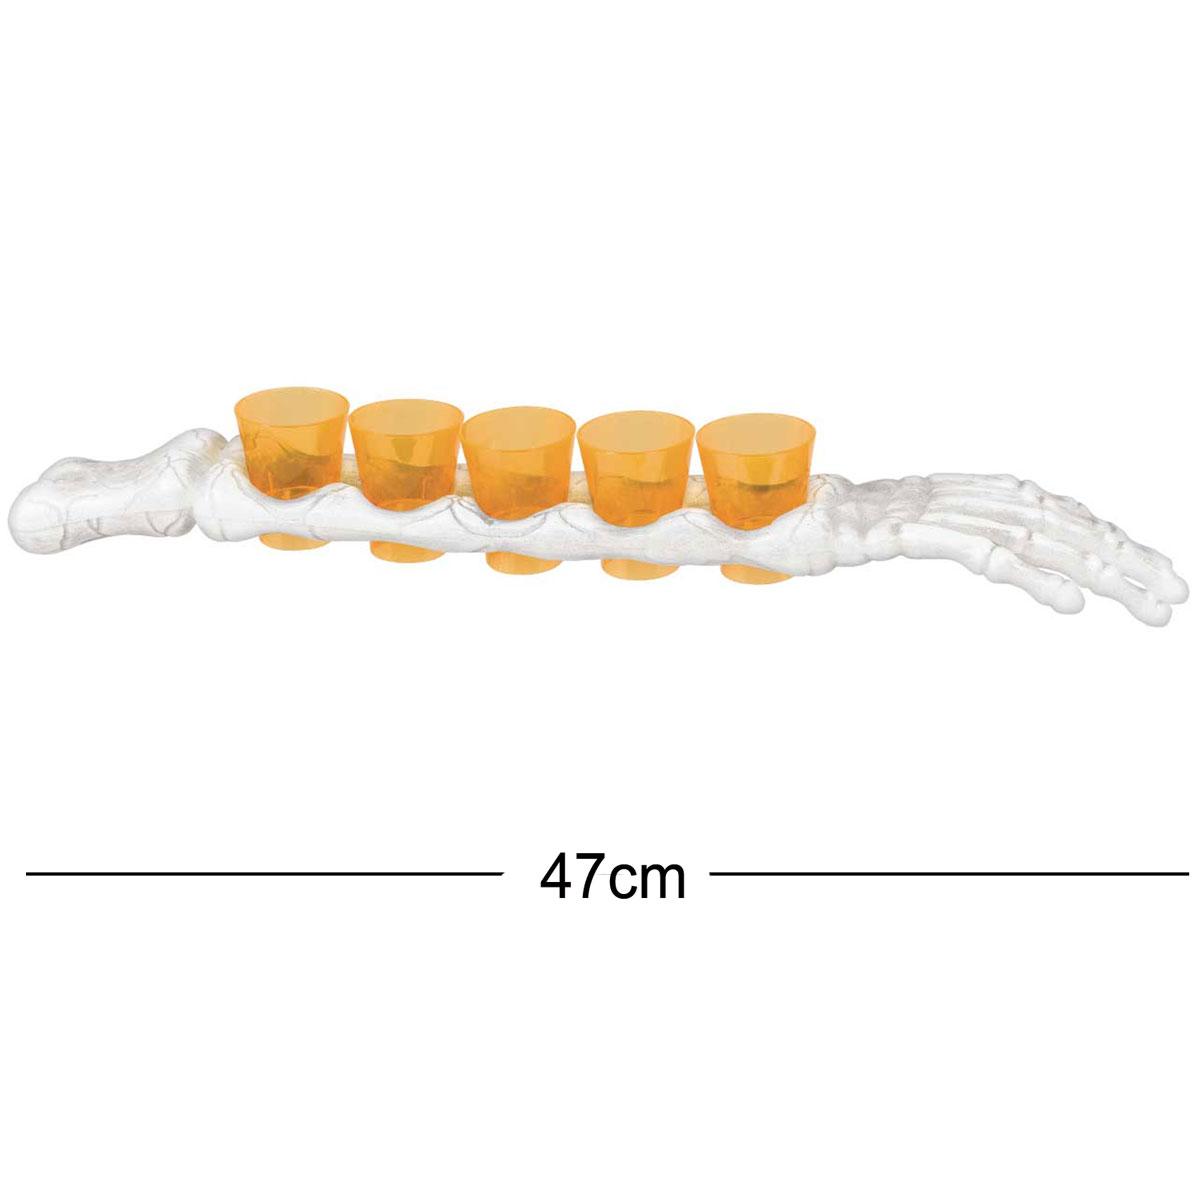 Boneyarad Shot In The Arm Halloween Skeleton Arm with 5 Shot Glasses by Amscan 210446 available here at Karnival Costumes online party shop